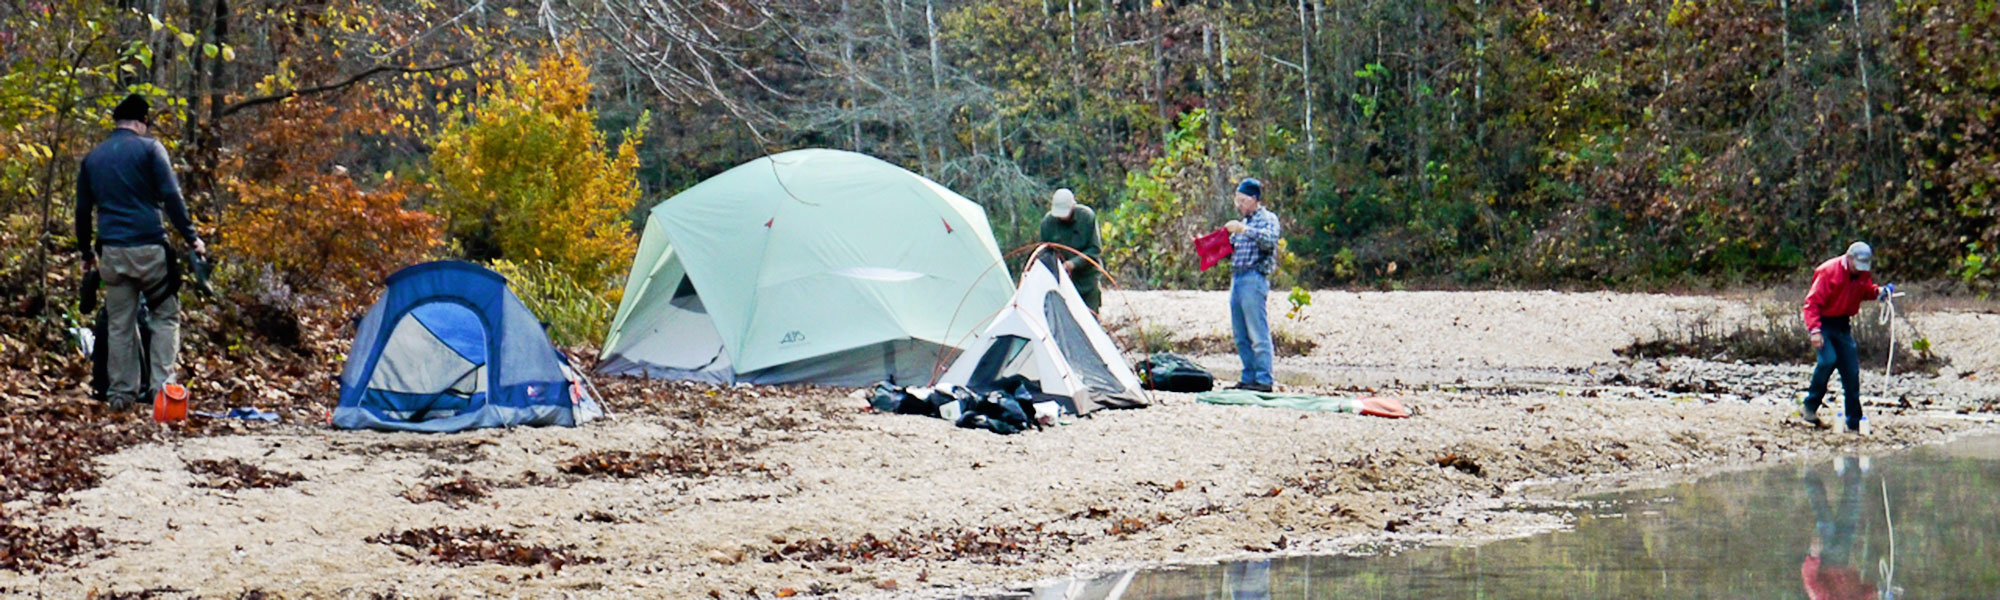 sharing-the-ozark-trail. group of people camping on a river bank. 